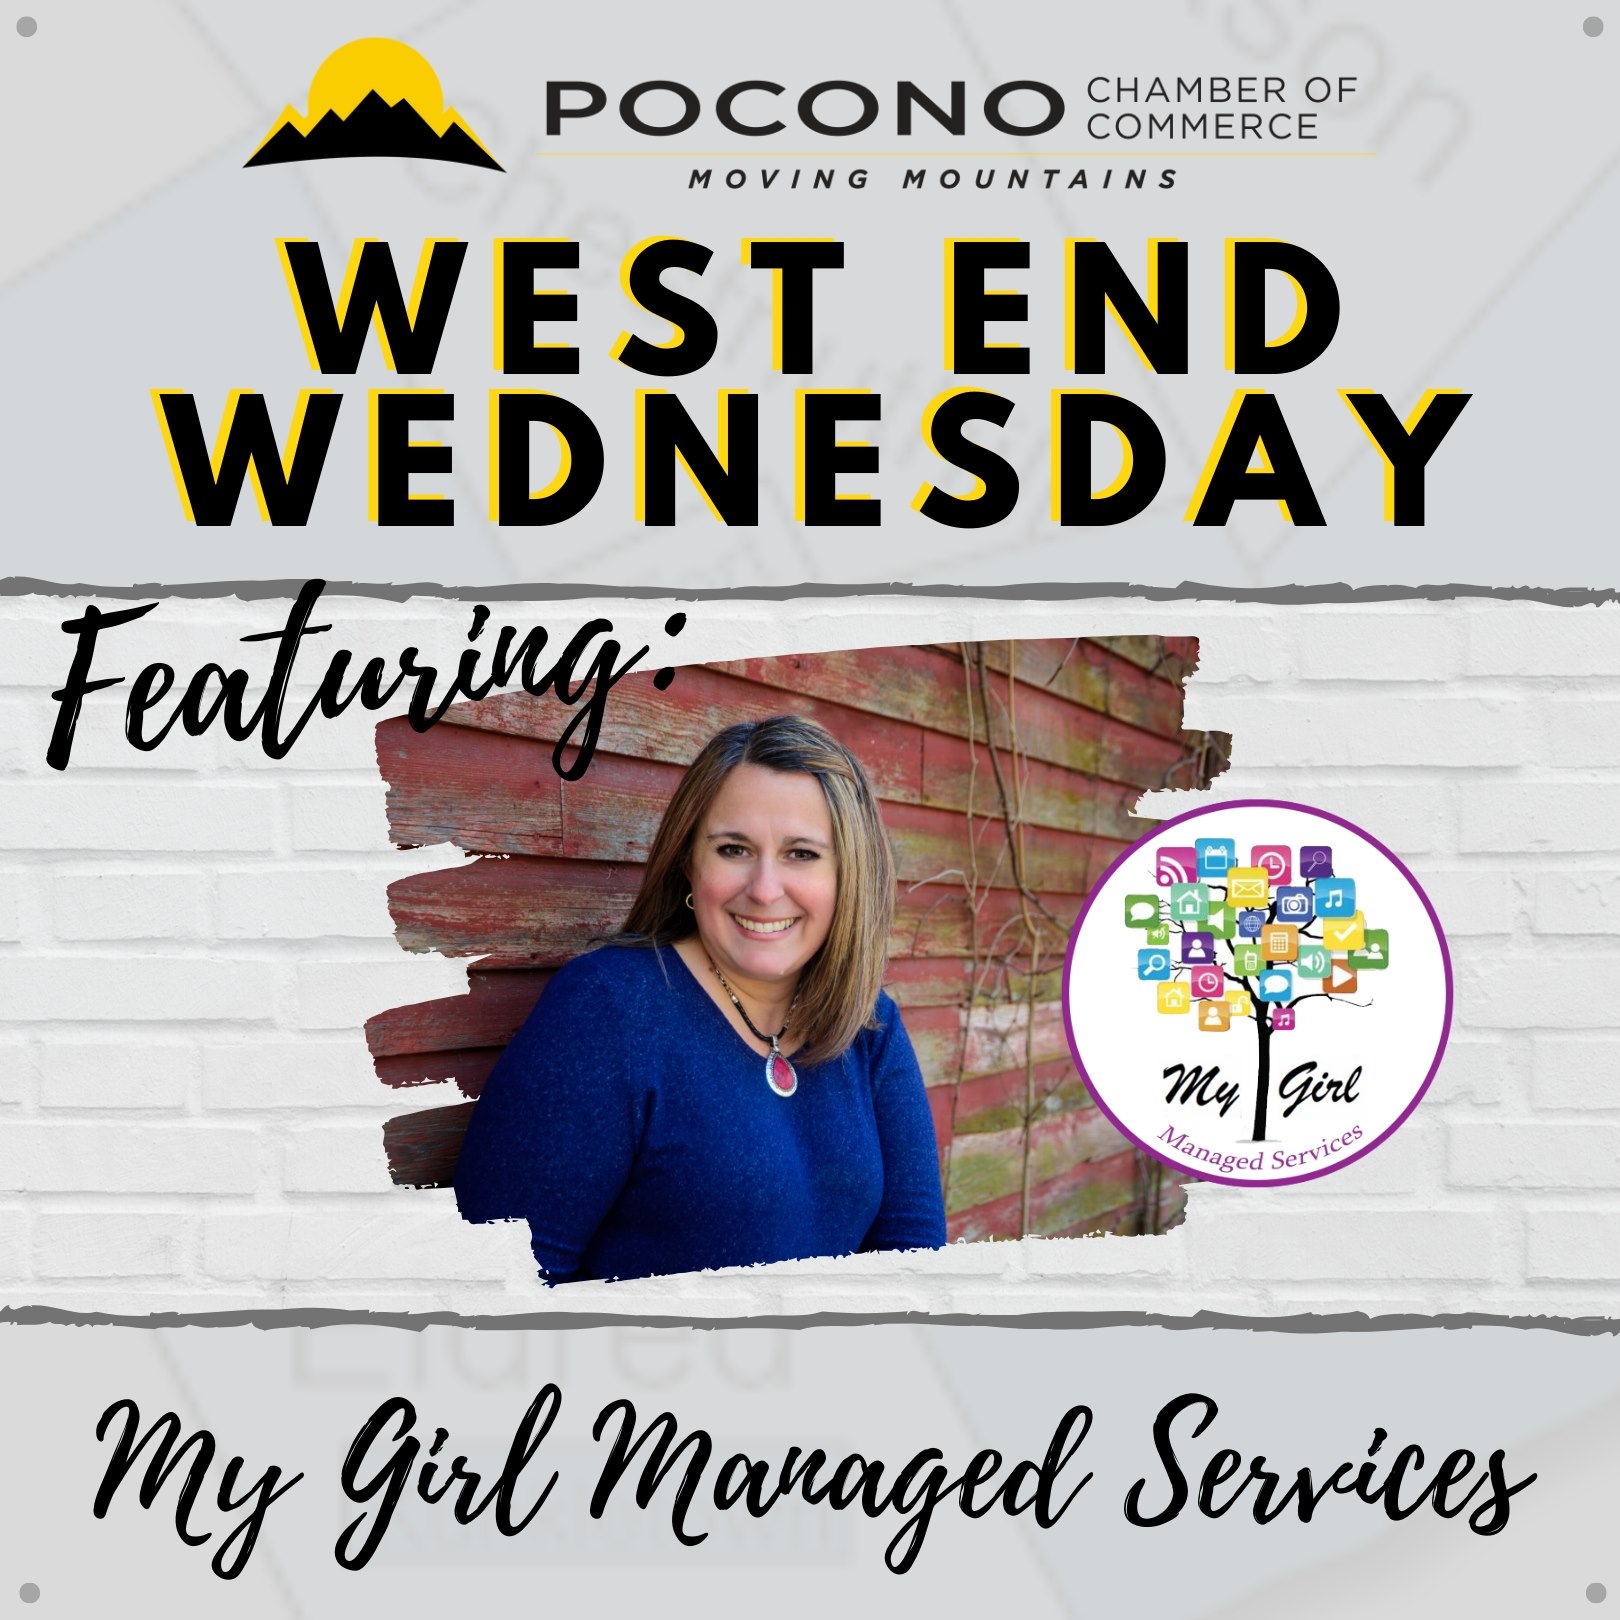 West End Wednesdays with the Pocono Chamber